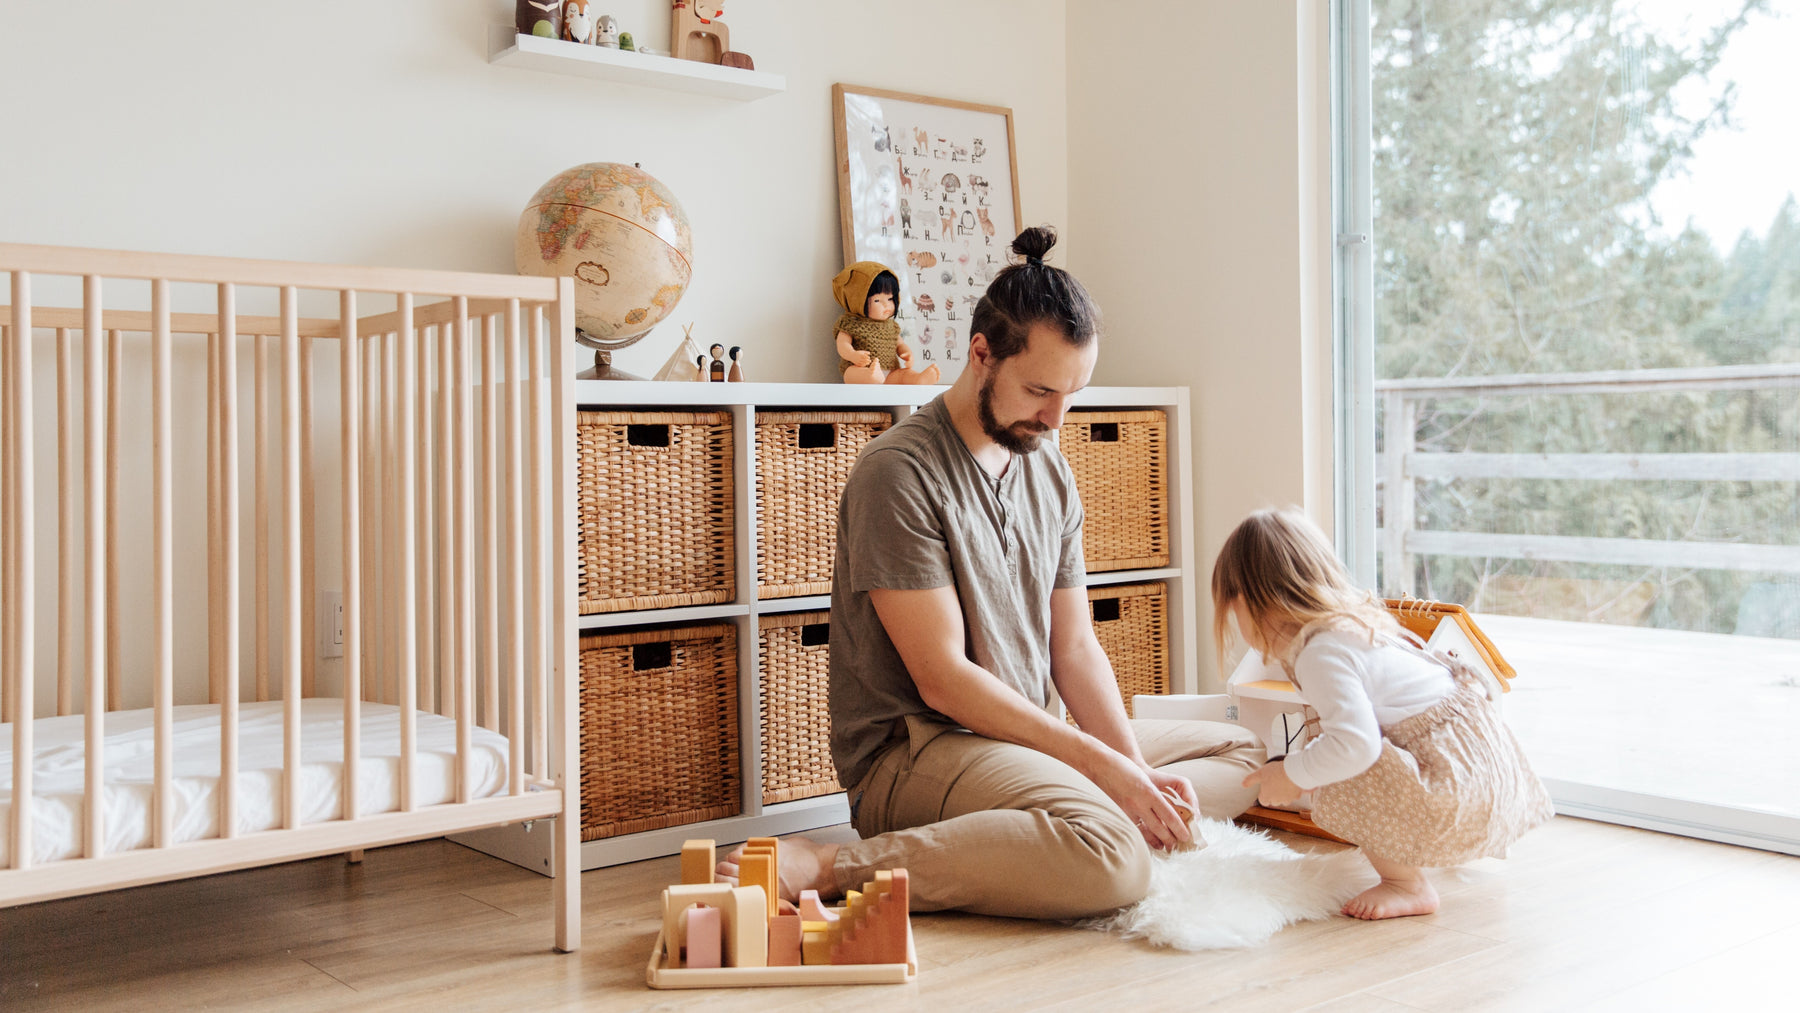 A Dad and his daughter are playing with a rug. Kids education activity, montessori parenting.